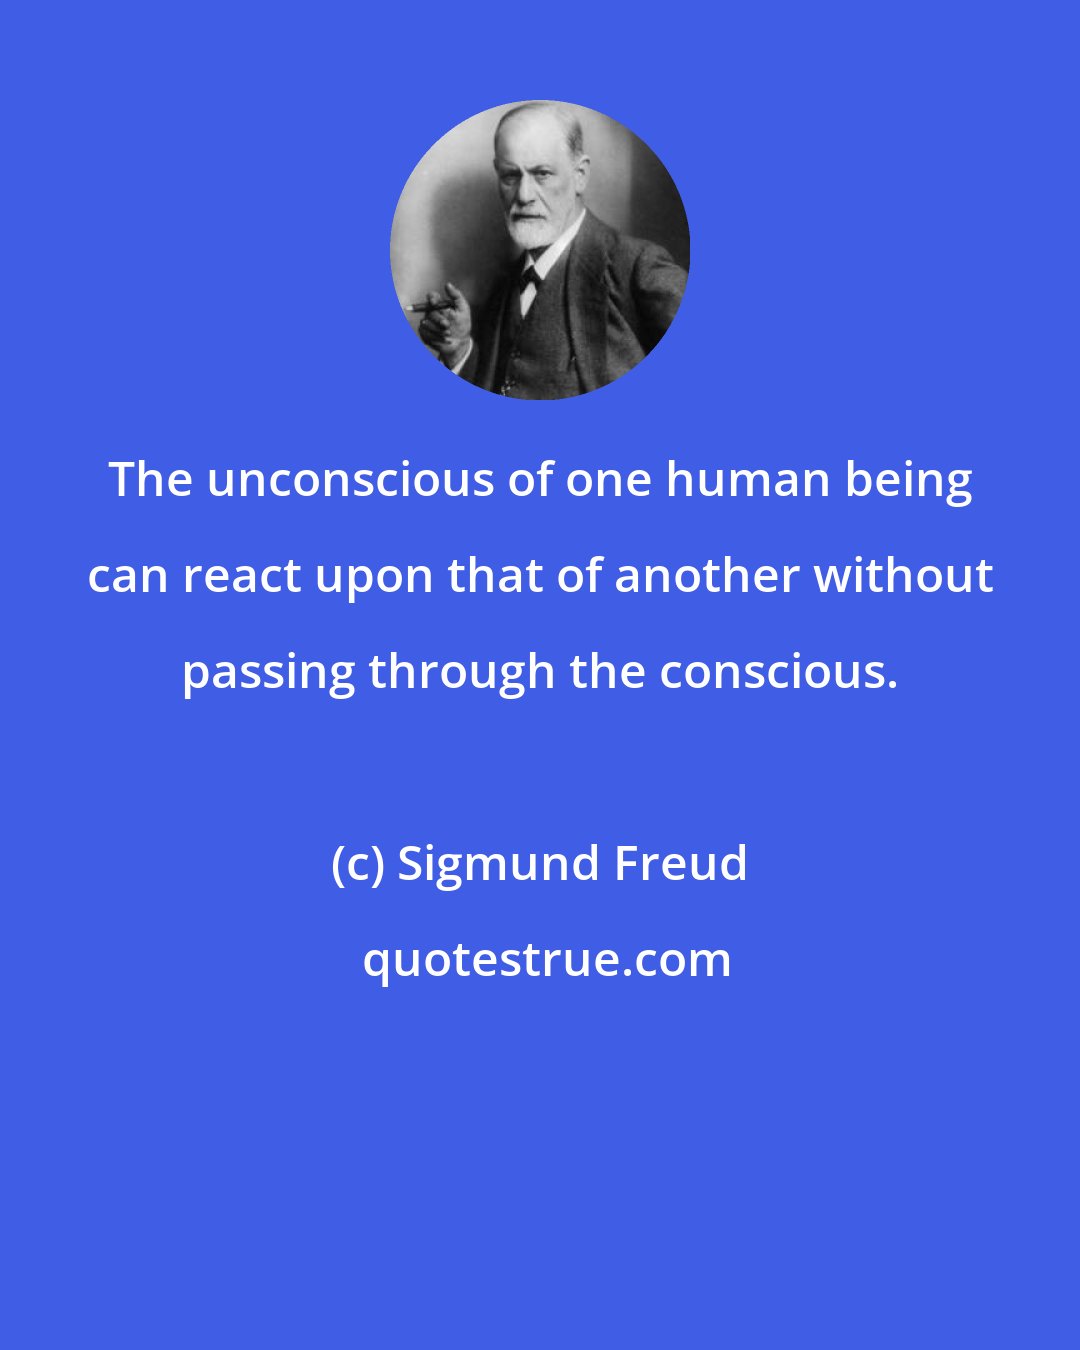 Sigmund Freud: The unconscious of one human being can react upon that of another without passing through the conscious.